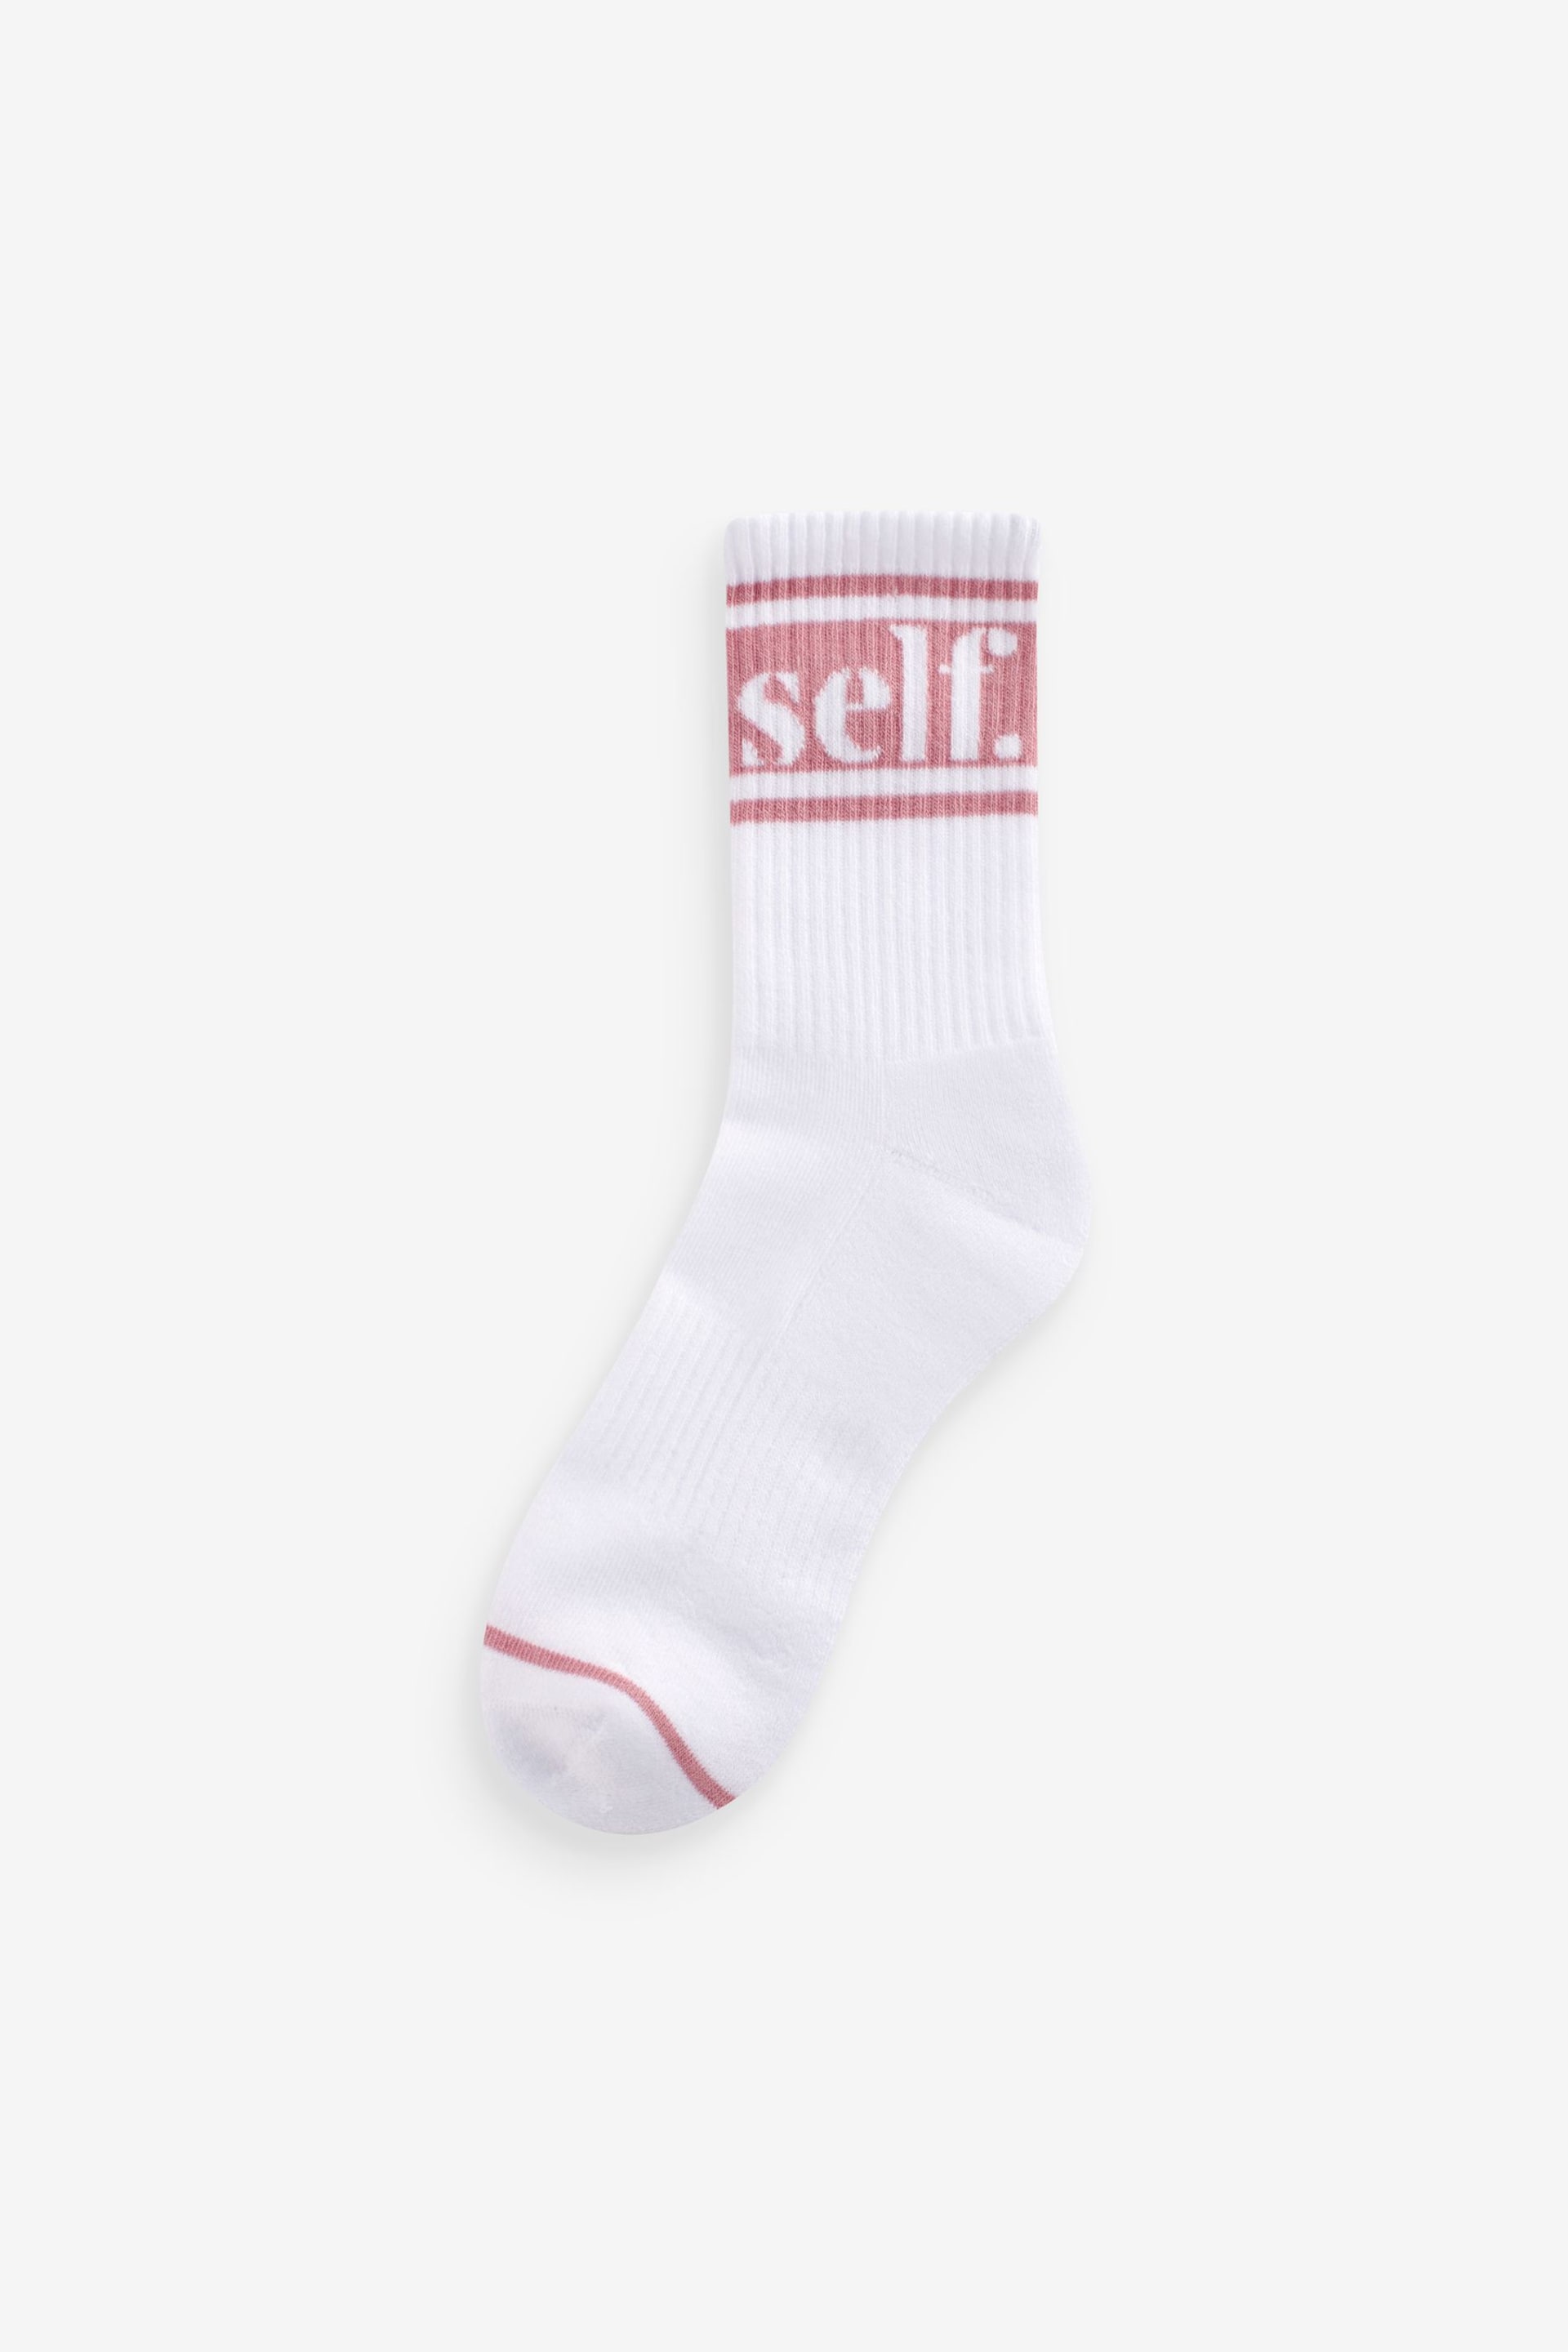 self. Pink/Navy/ Teal Cushioned Sole Ribbed Slogan Ankle Socks 3 Pack - Image 4 of 5